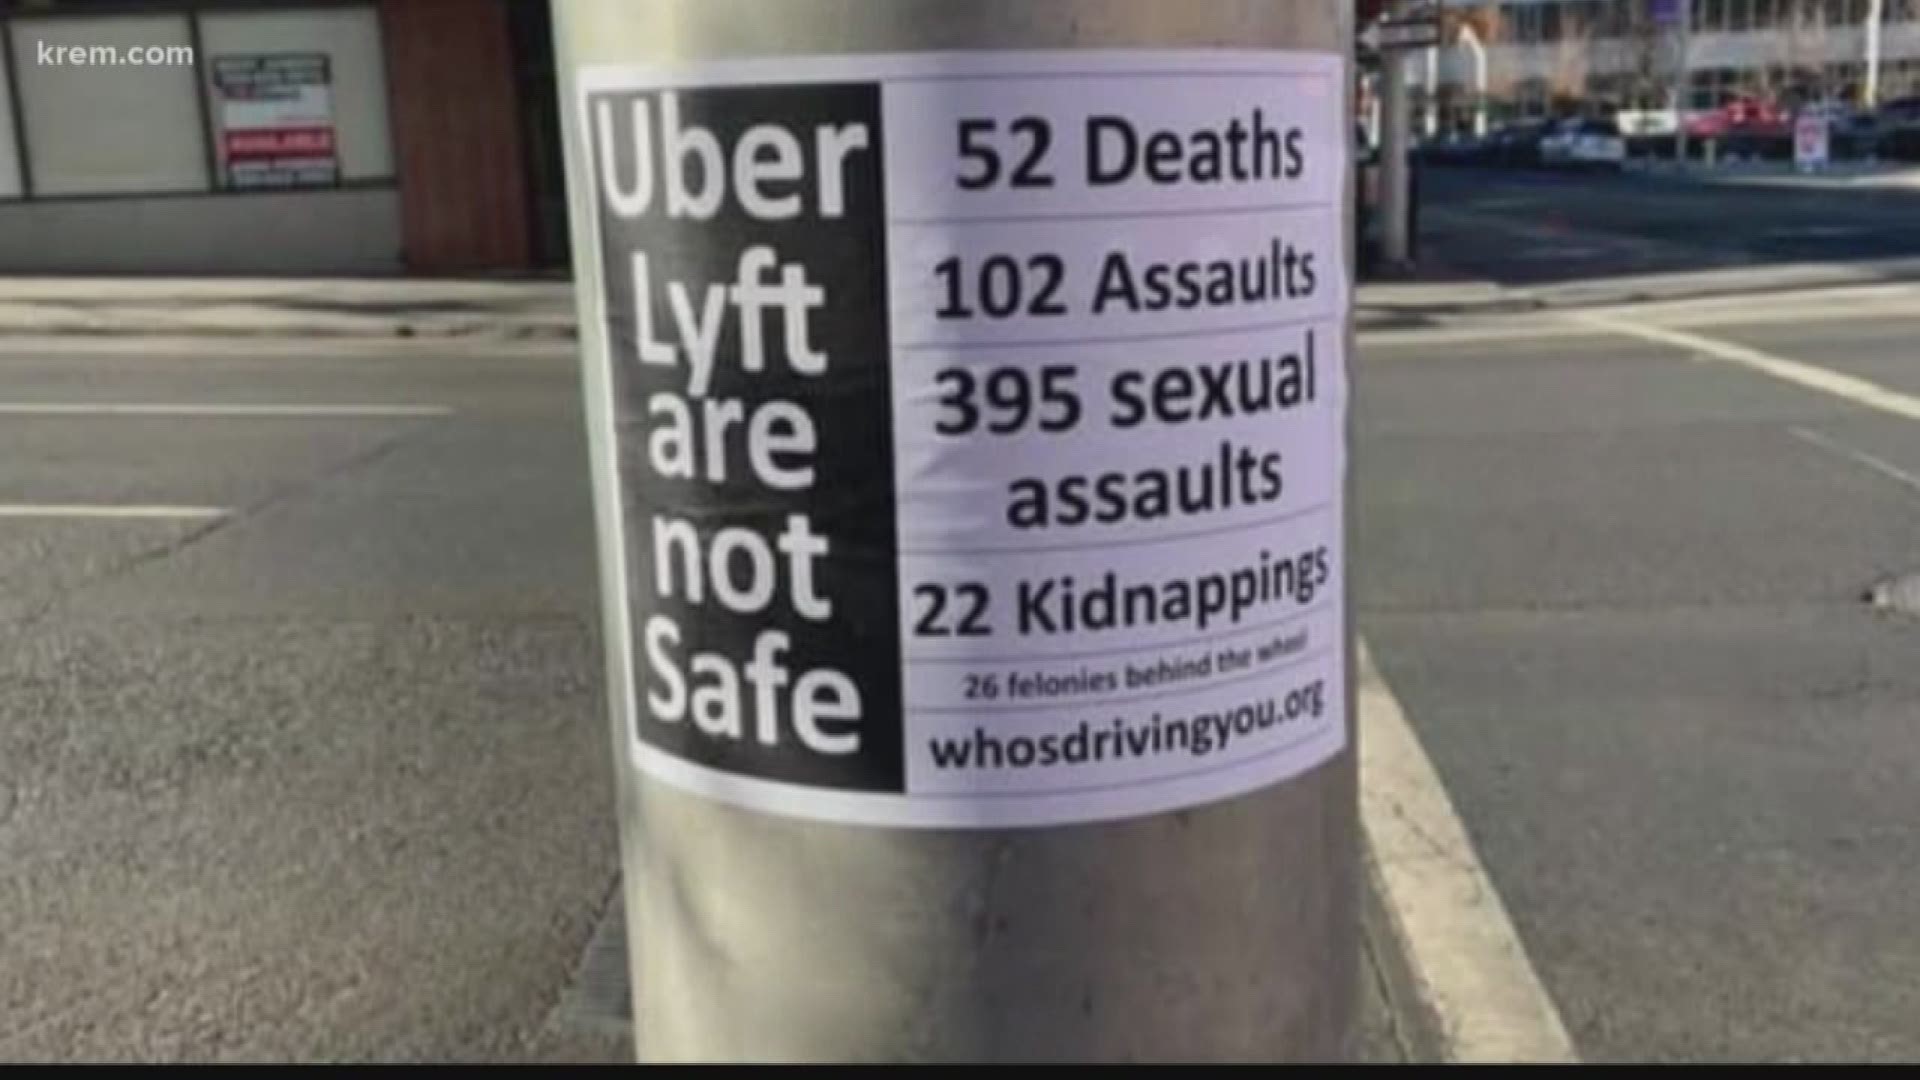 Black-and-white posters claiming to show that Uber and Lyft are “not safe” have been appearing, and then disappearing, in areas around downtown Spokane.